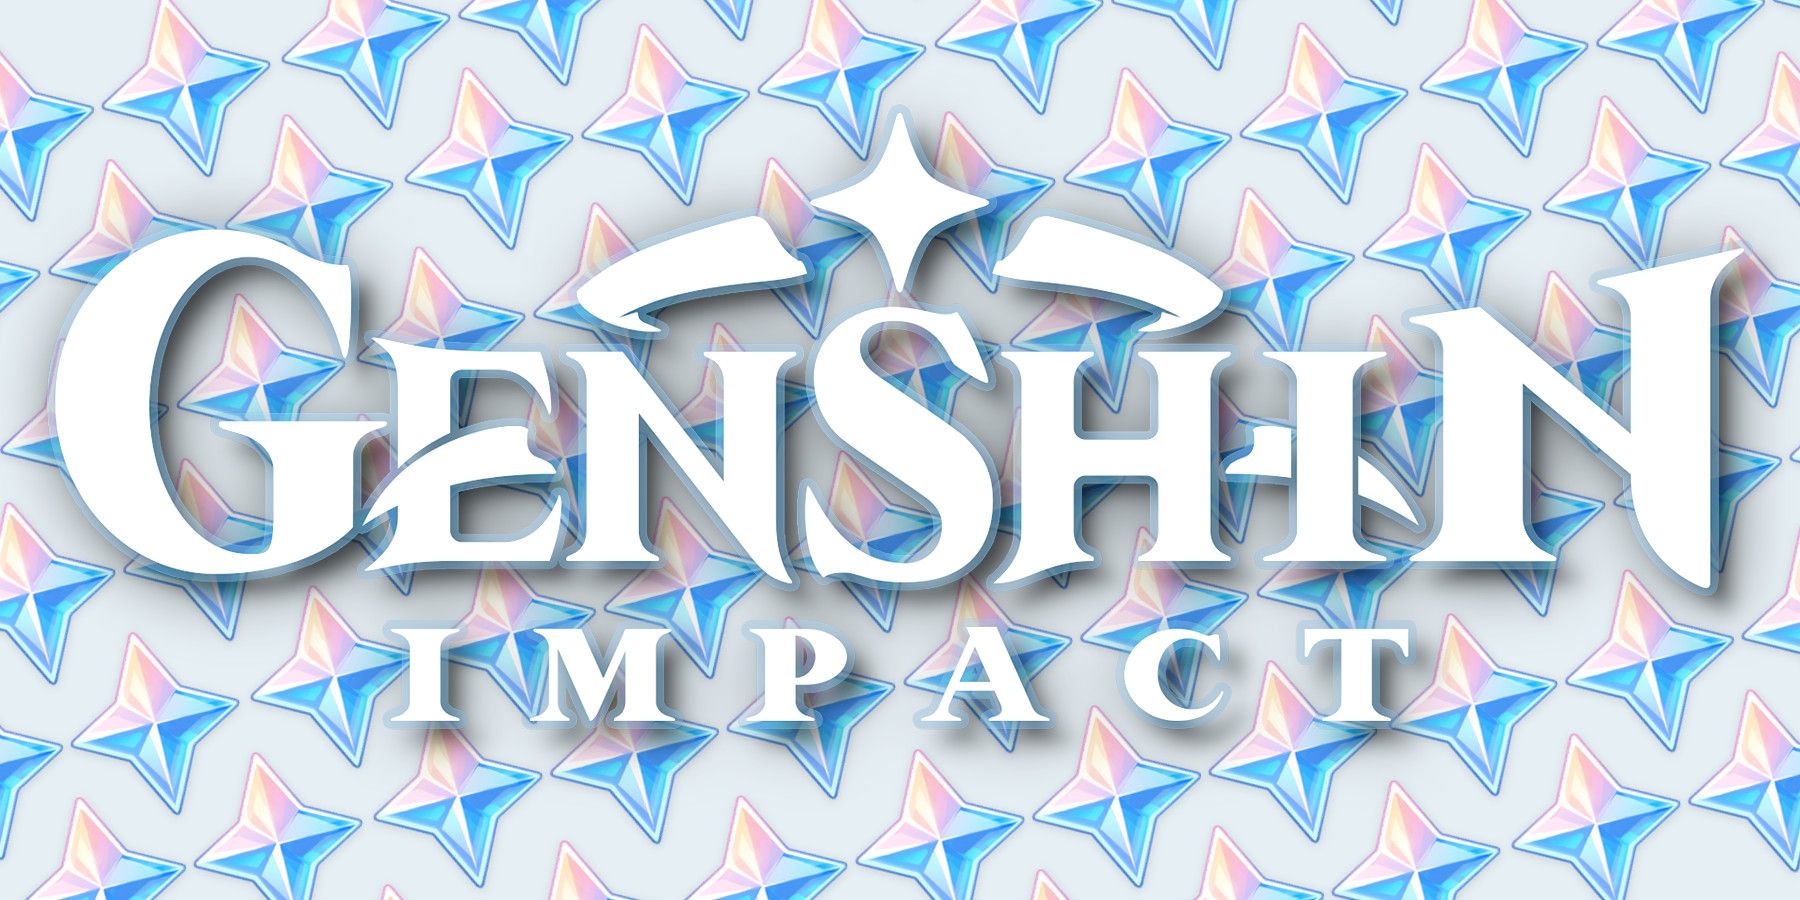 Genshin Impact: New Promo Codes From 2.1 Trailer